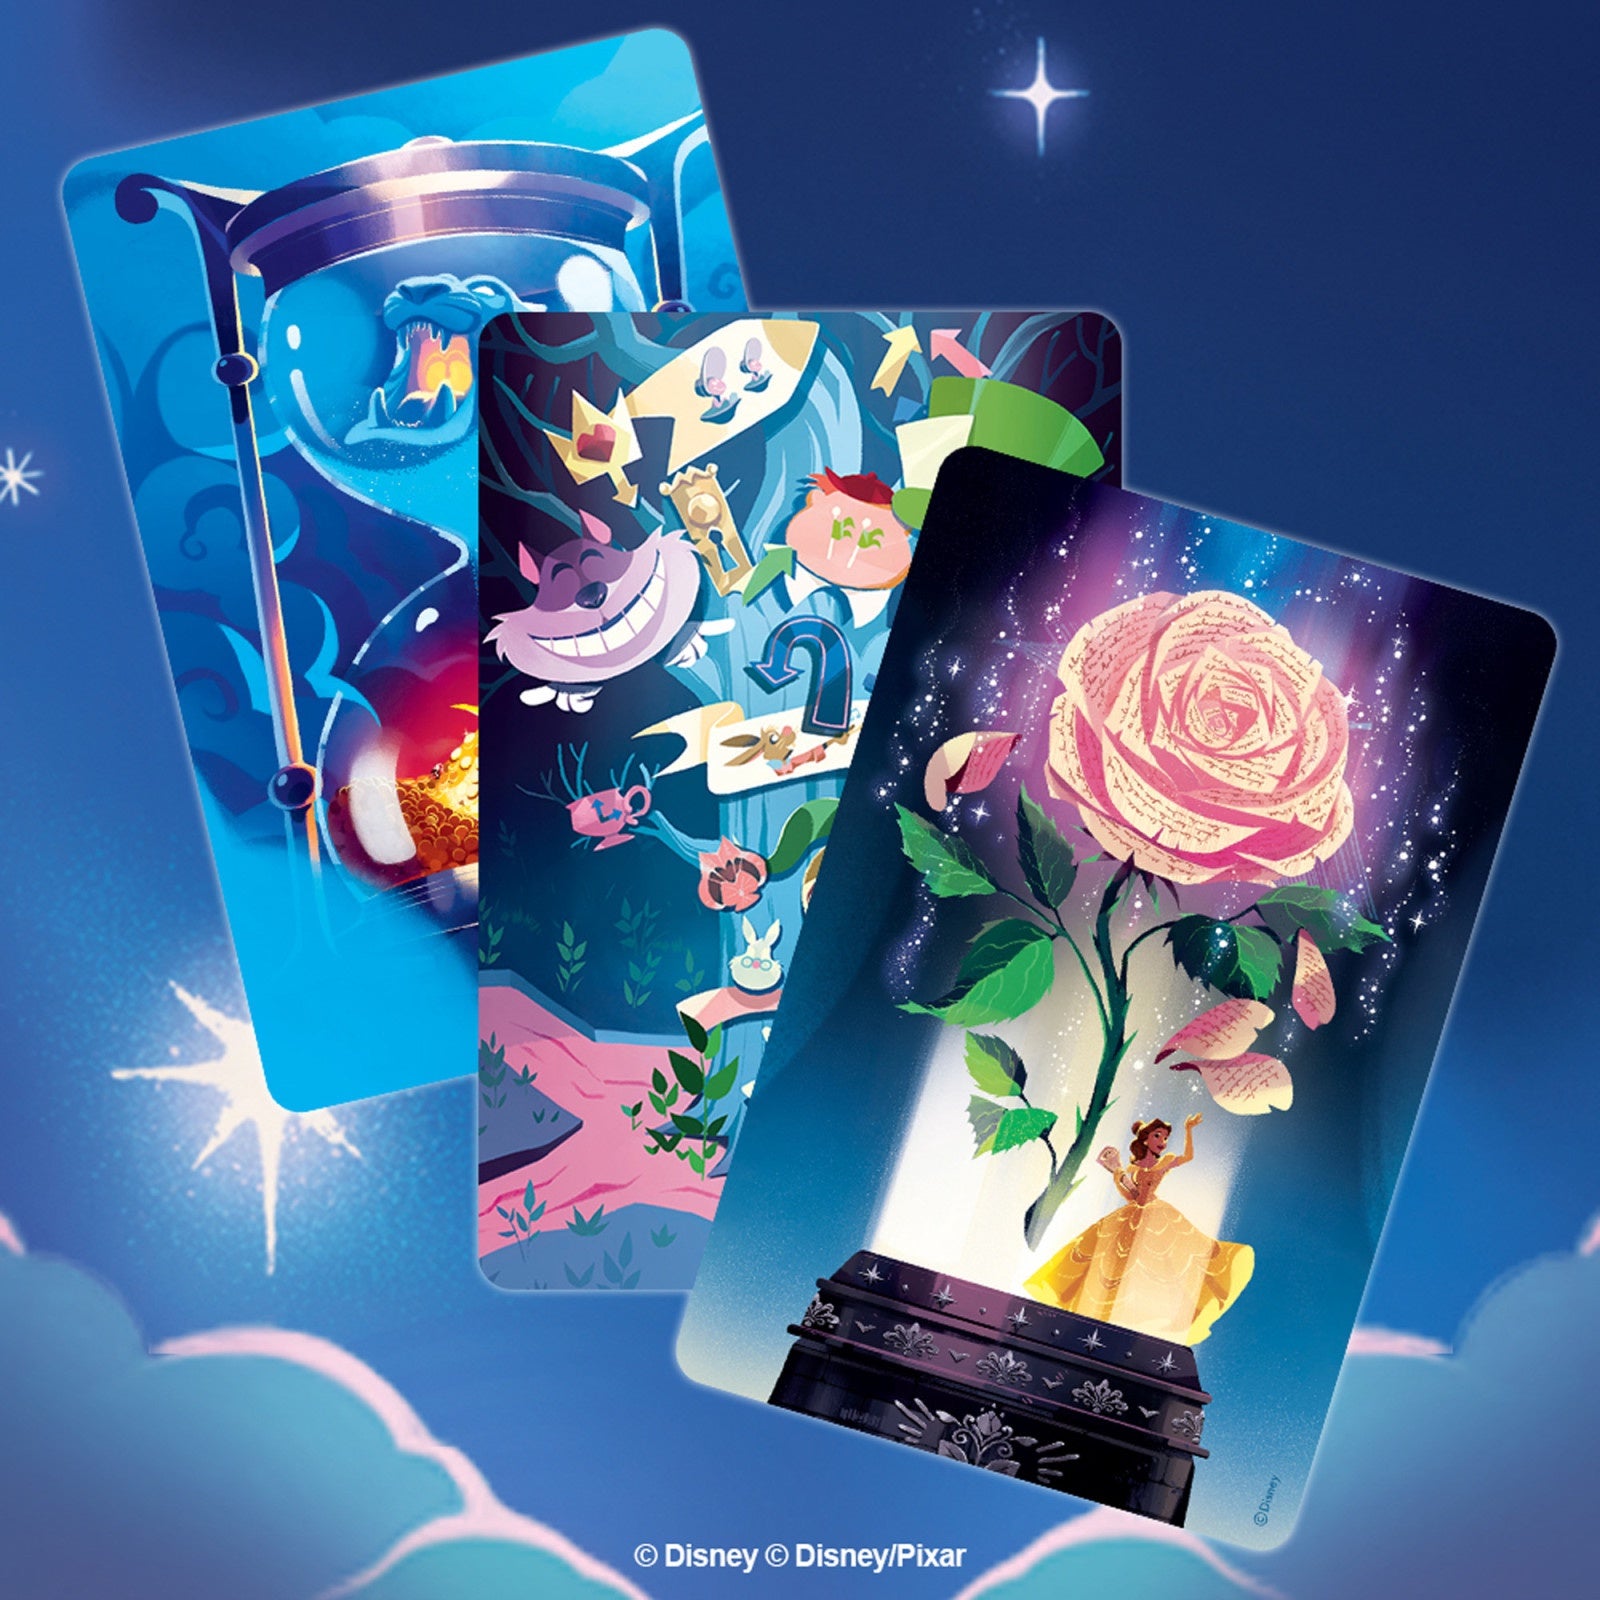 Dixit: Disney Edition Celebrates 100 Years Of Disney, Out Today